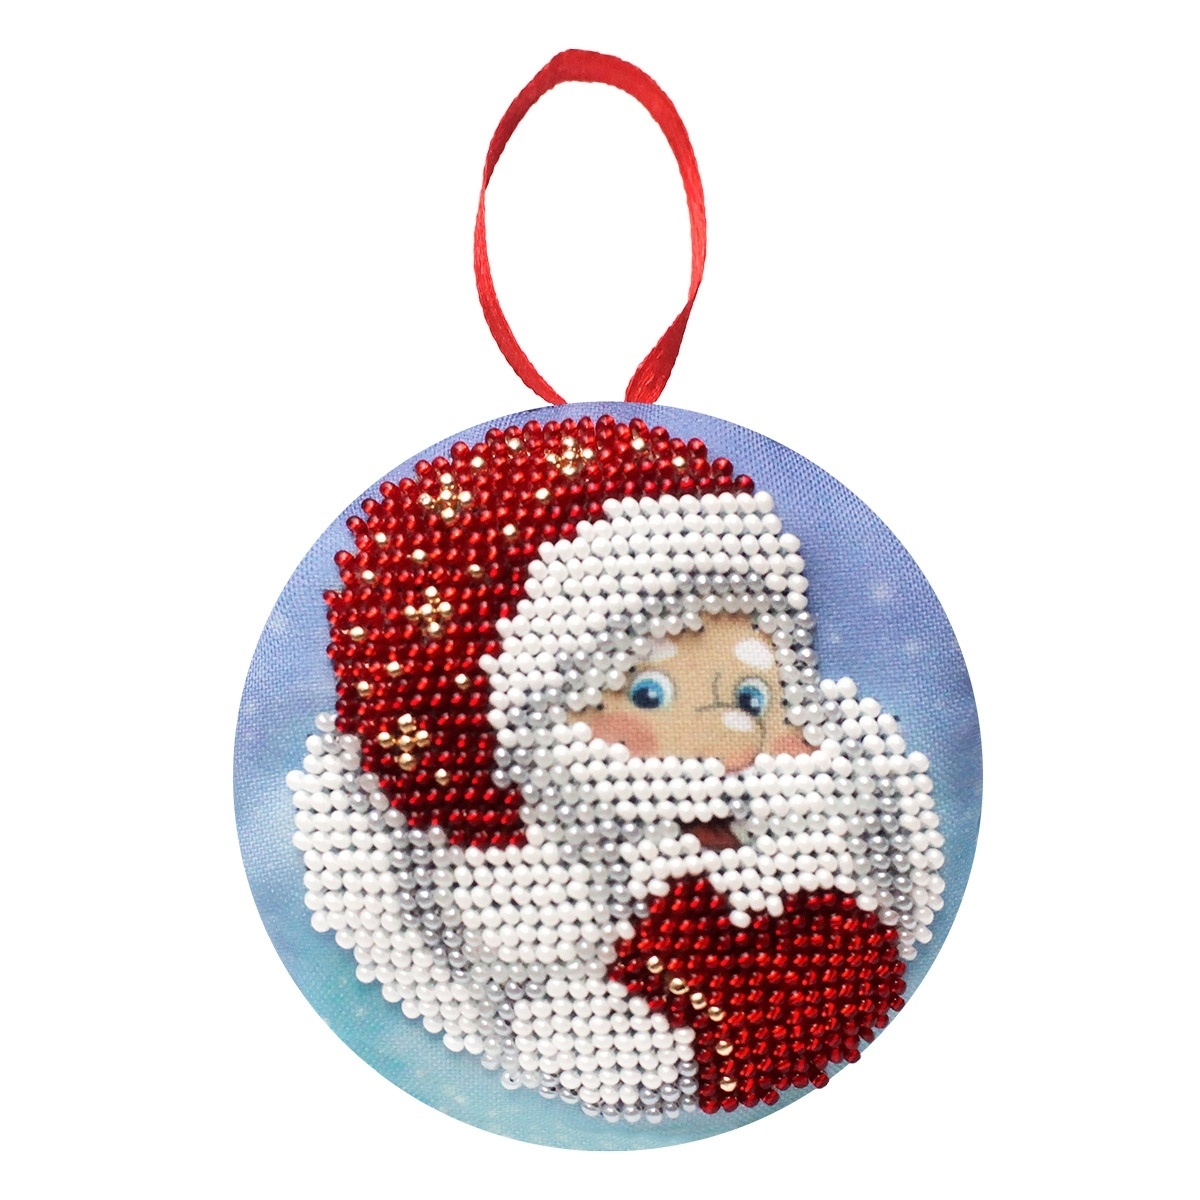 New Year's Toy Santa Claus Bead Embroidery Kit фото 1